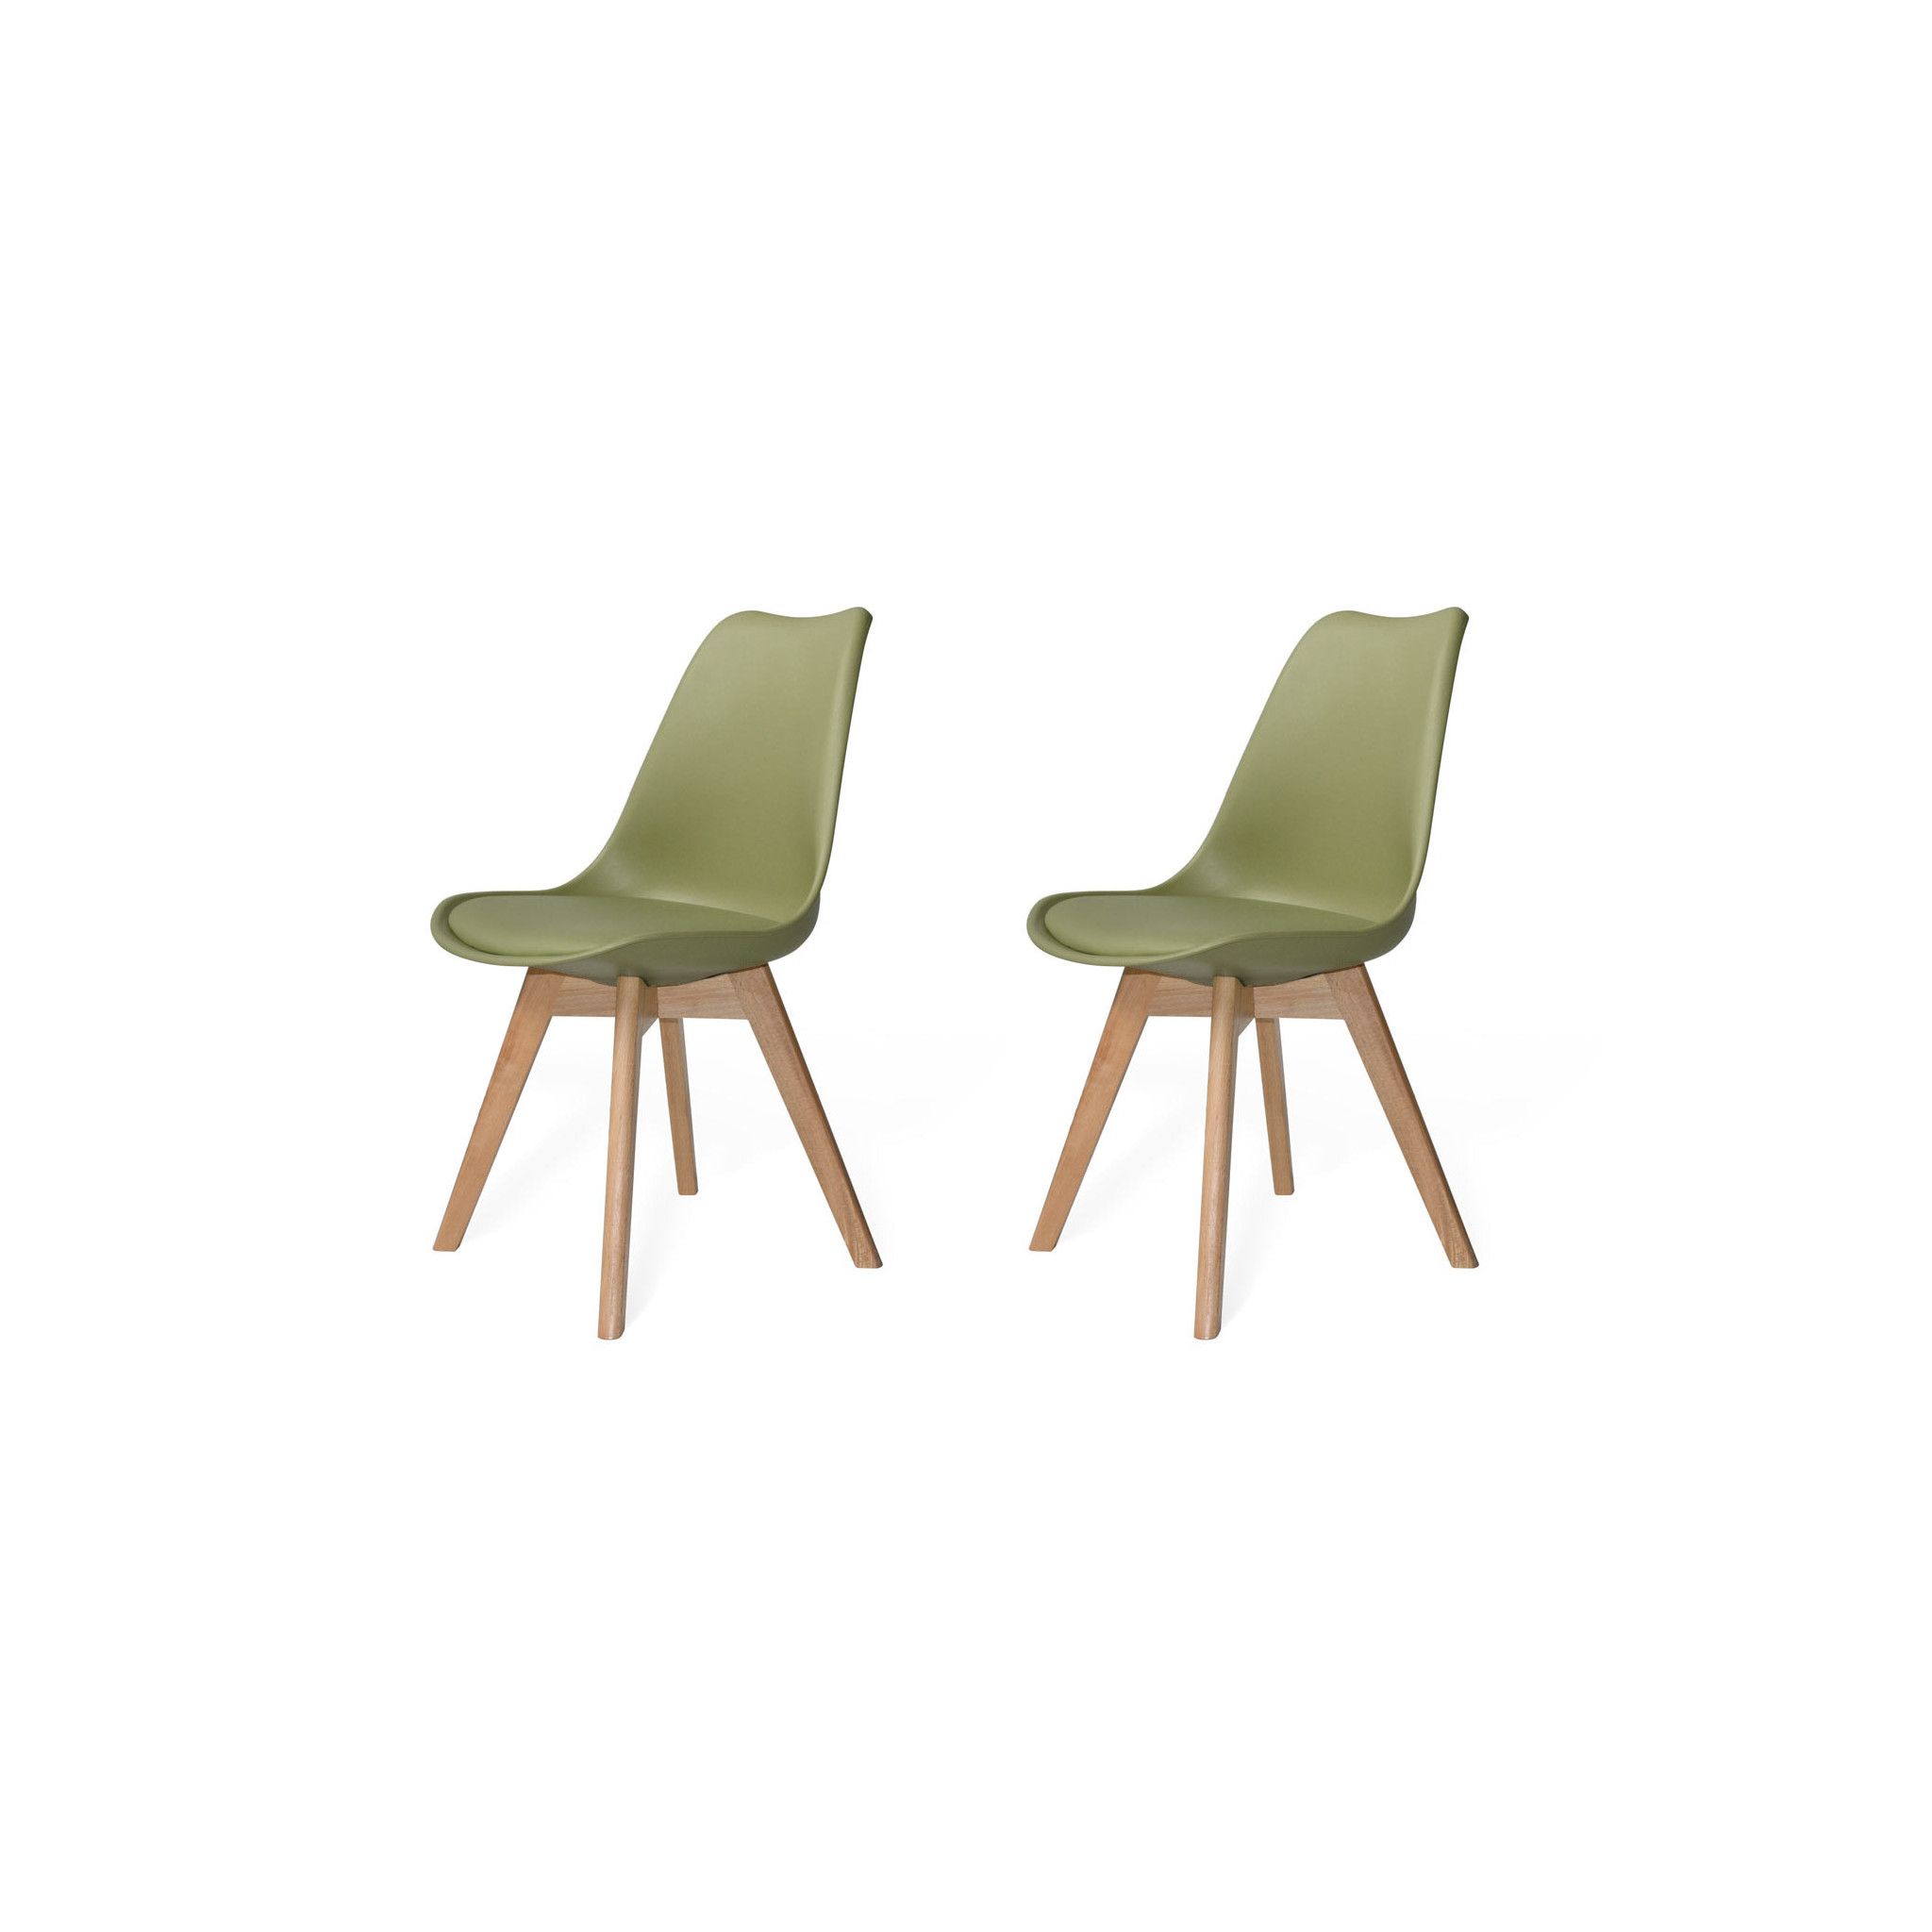 PACK 2 CHAISES NEW TOWER WOOD VERTE EXTRA QUALITY